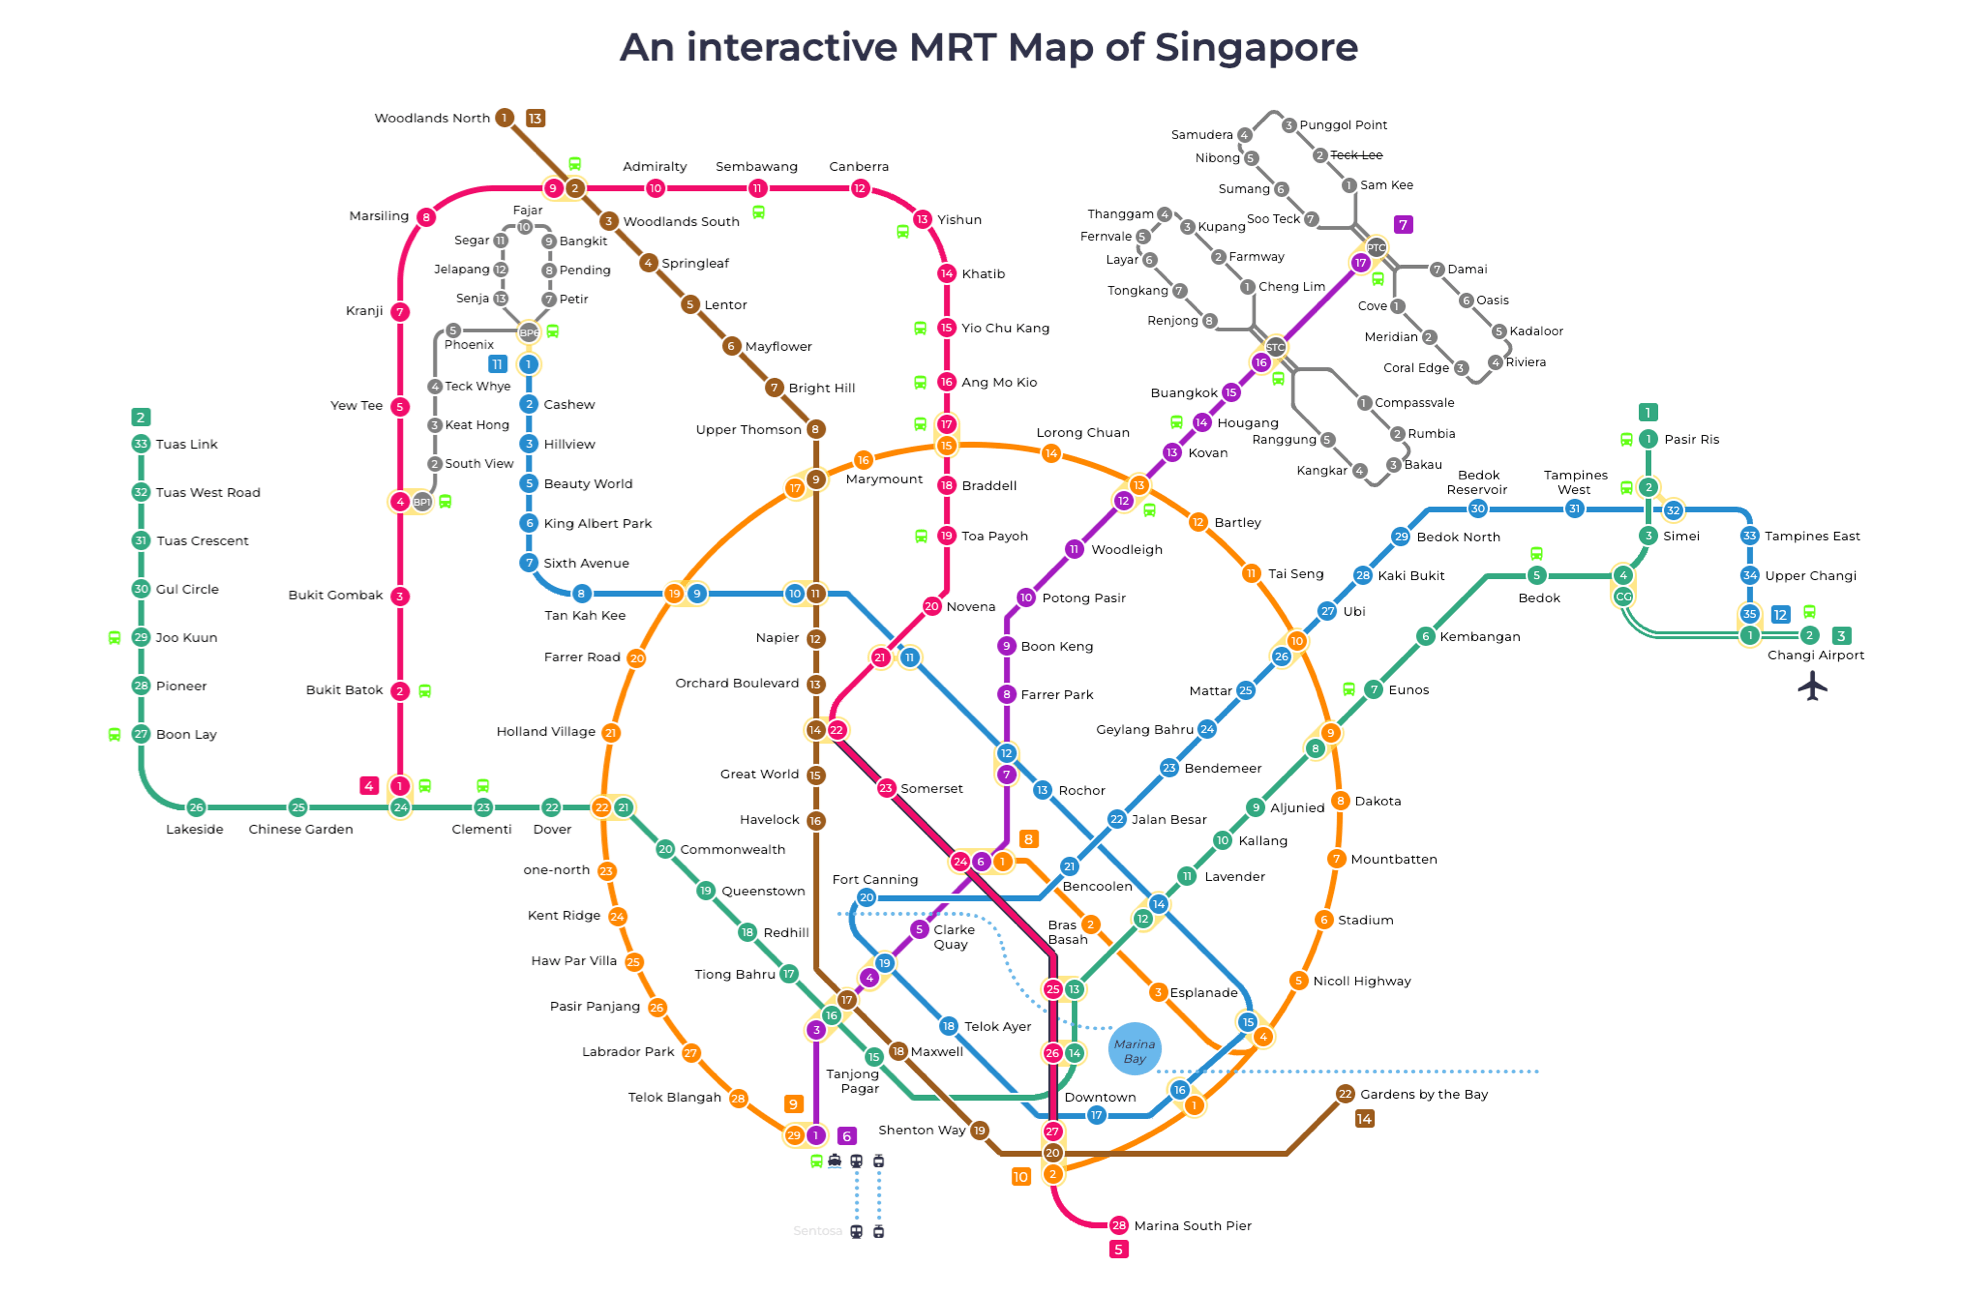 8 Incredible Aspects of the Singapore MRT Map You Never Knew - MRT Map ...